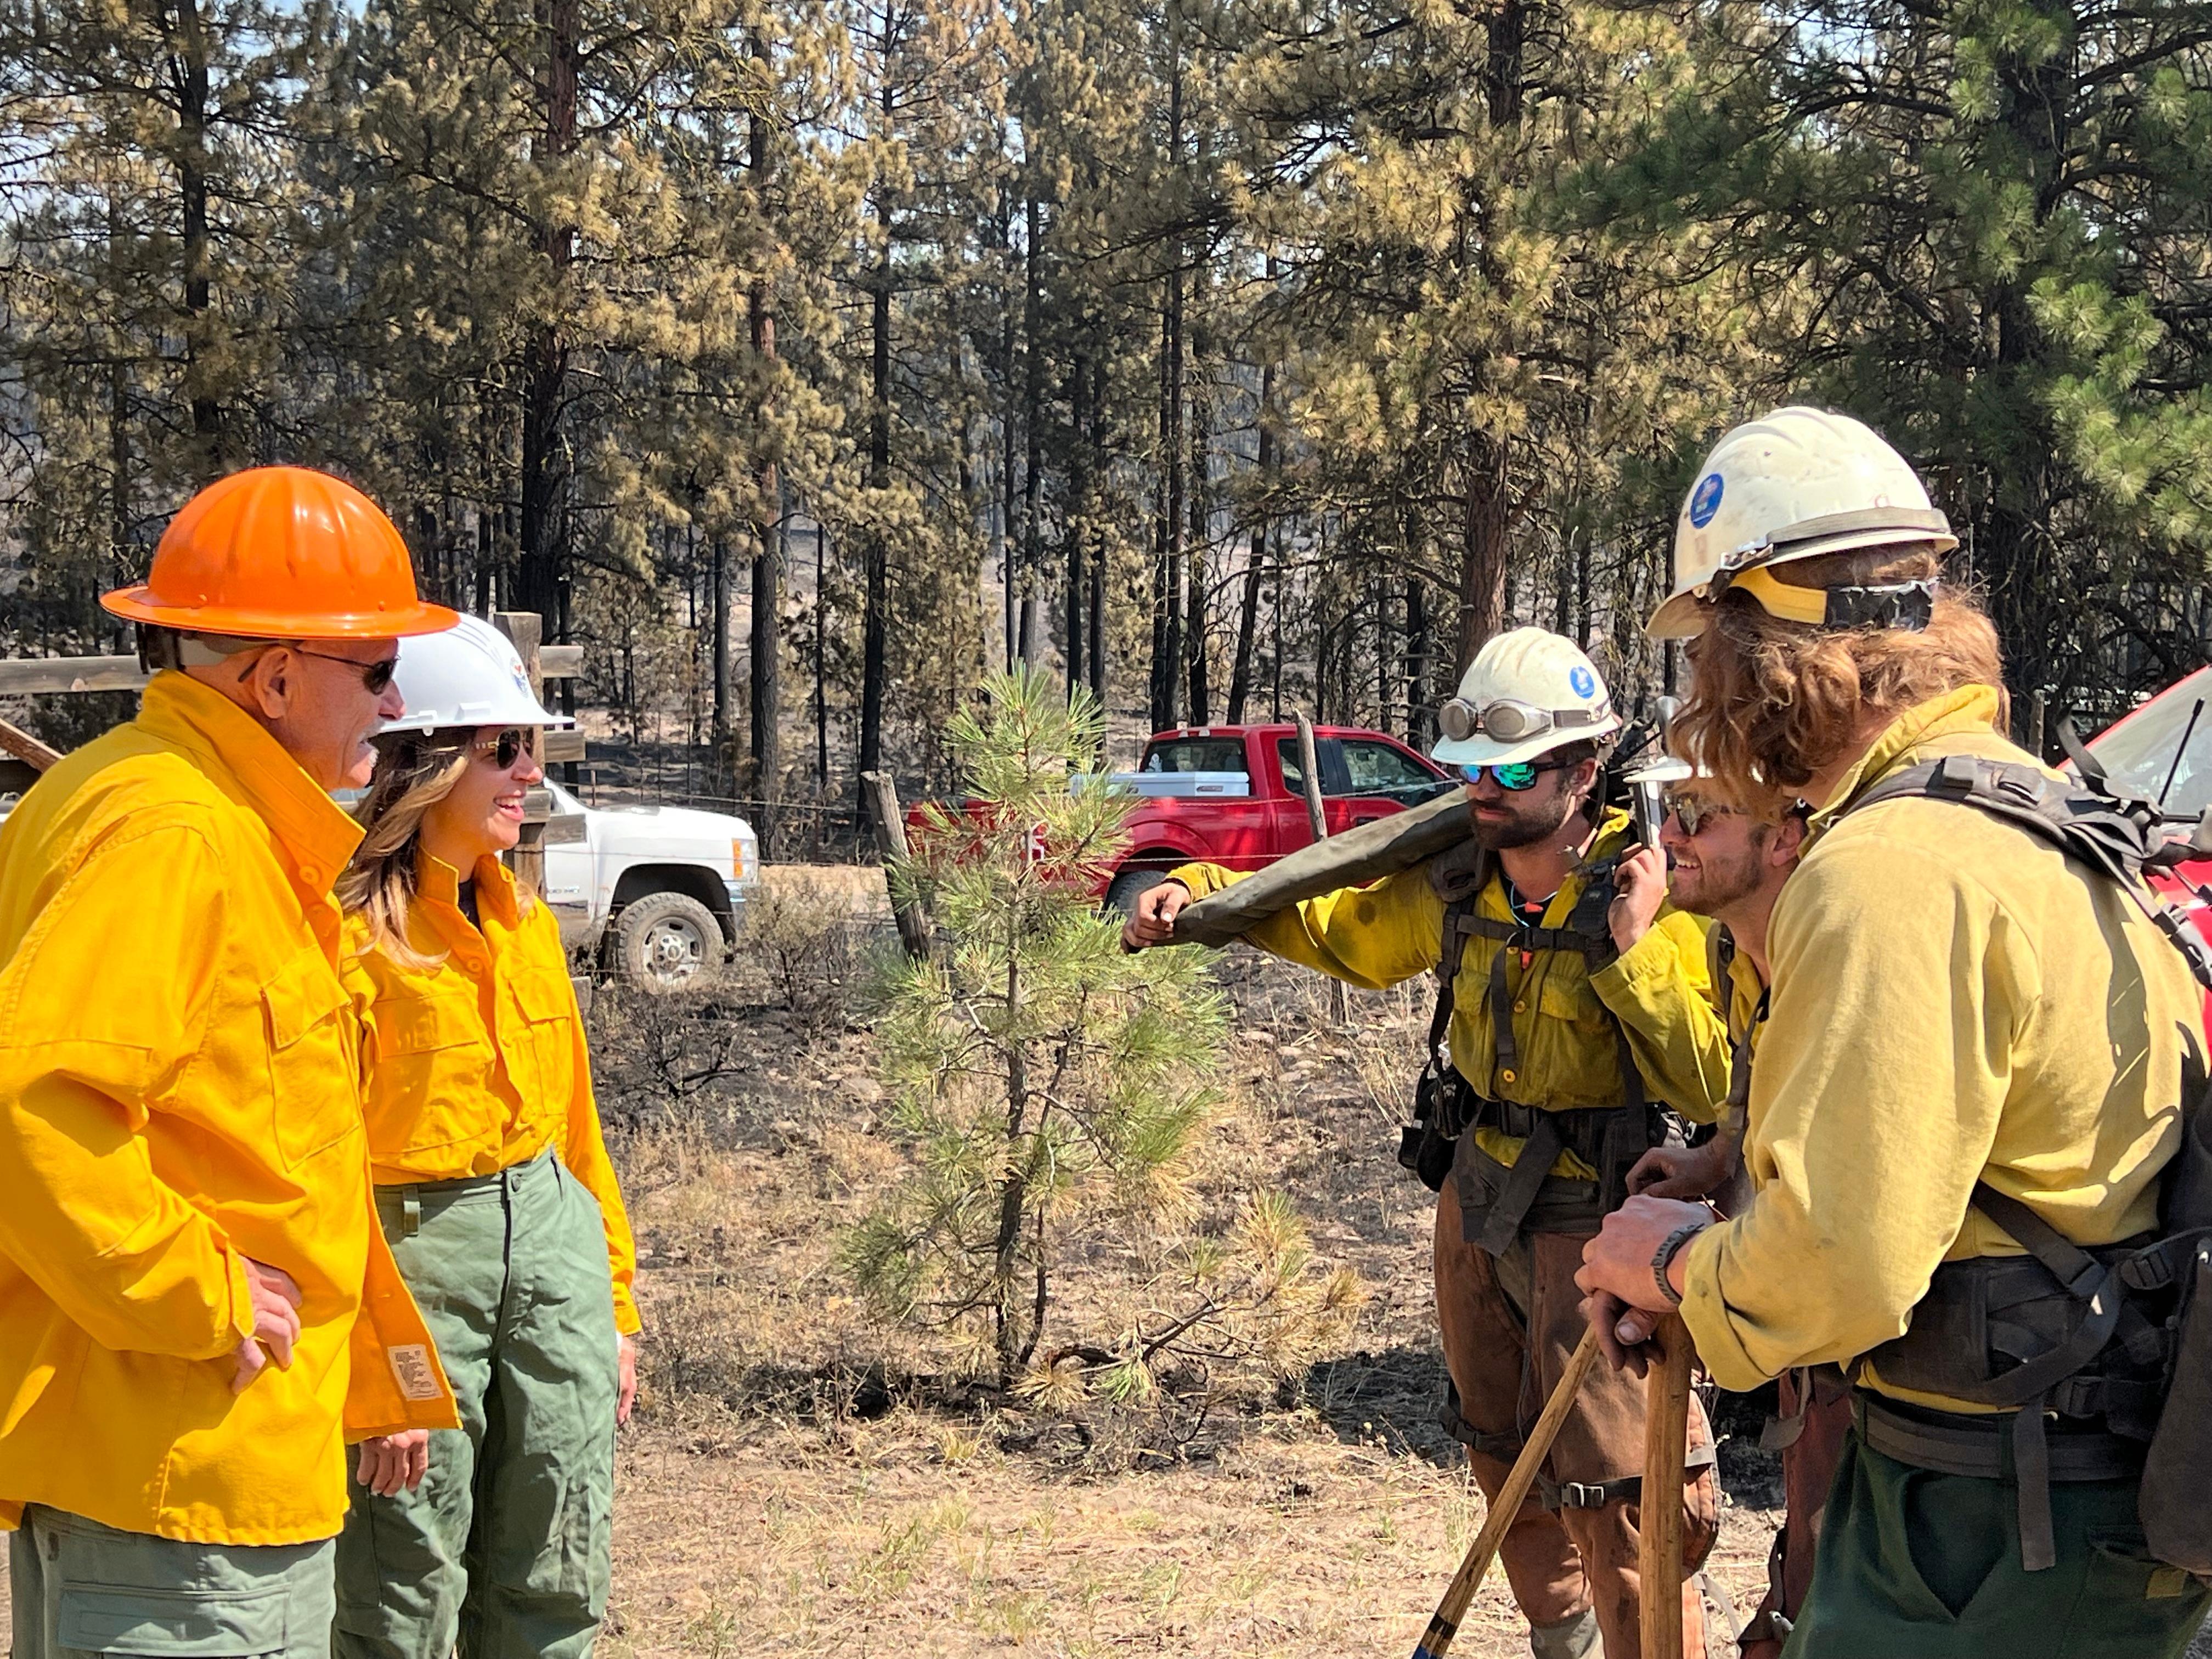 Hilary Franz, Washington State Commisioner of Public Lands and Representative Tom Dent visit the fireline and talk to firefighters. 8/6